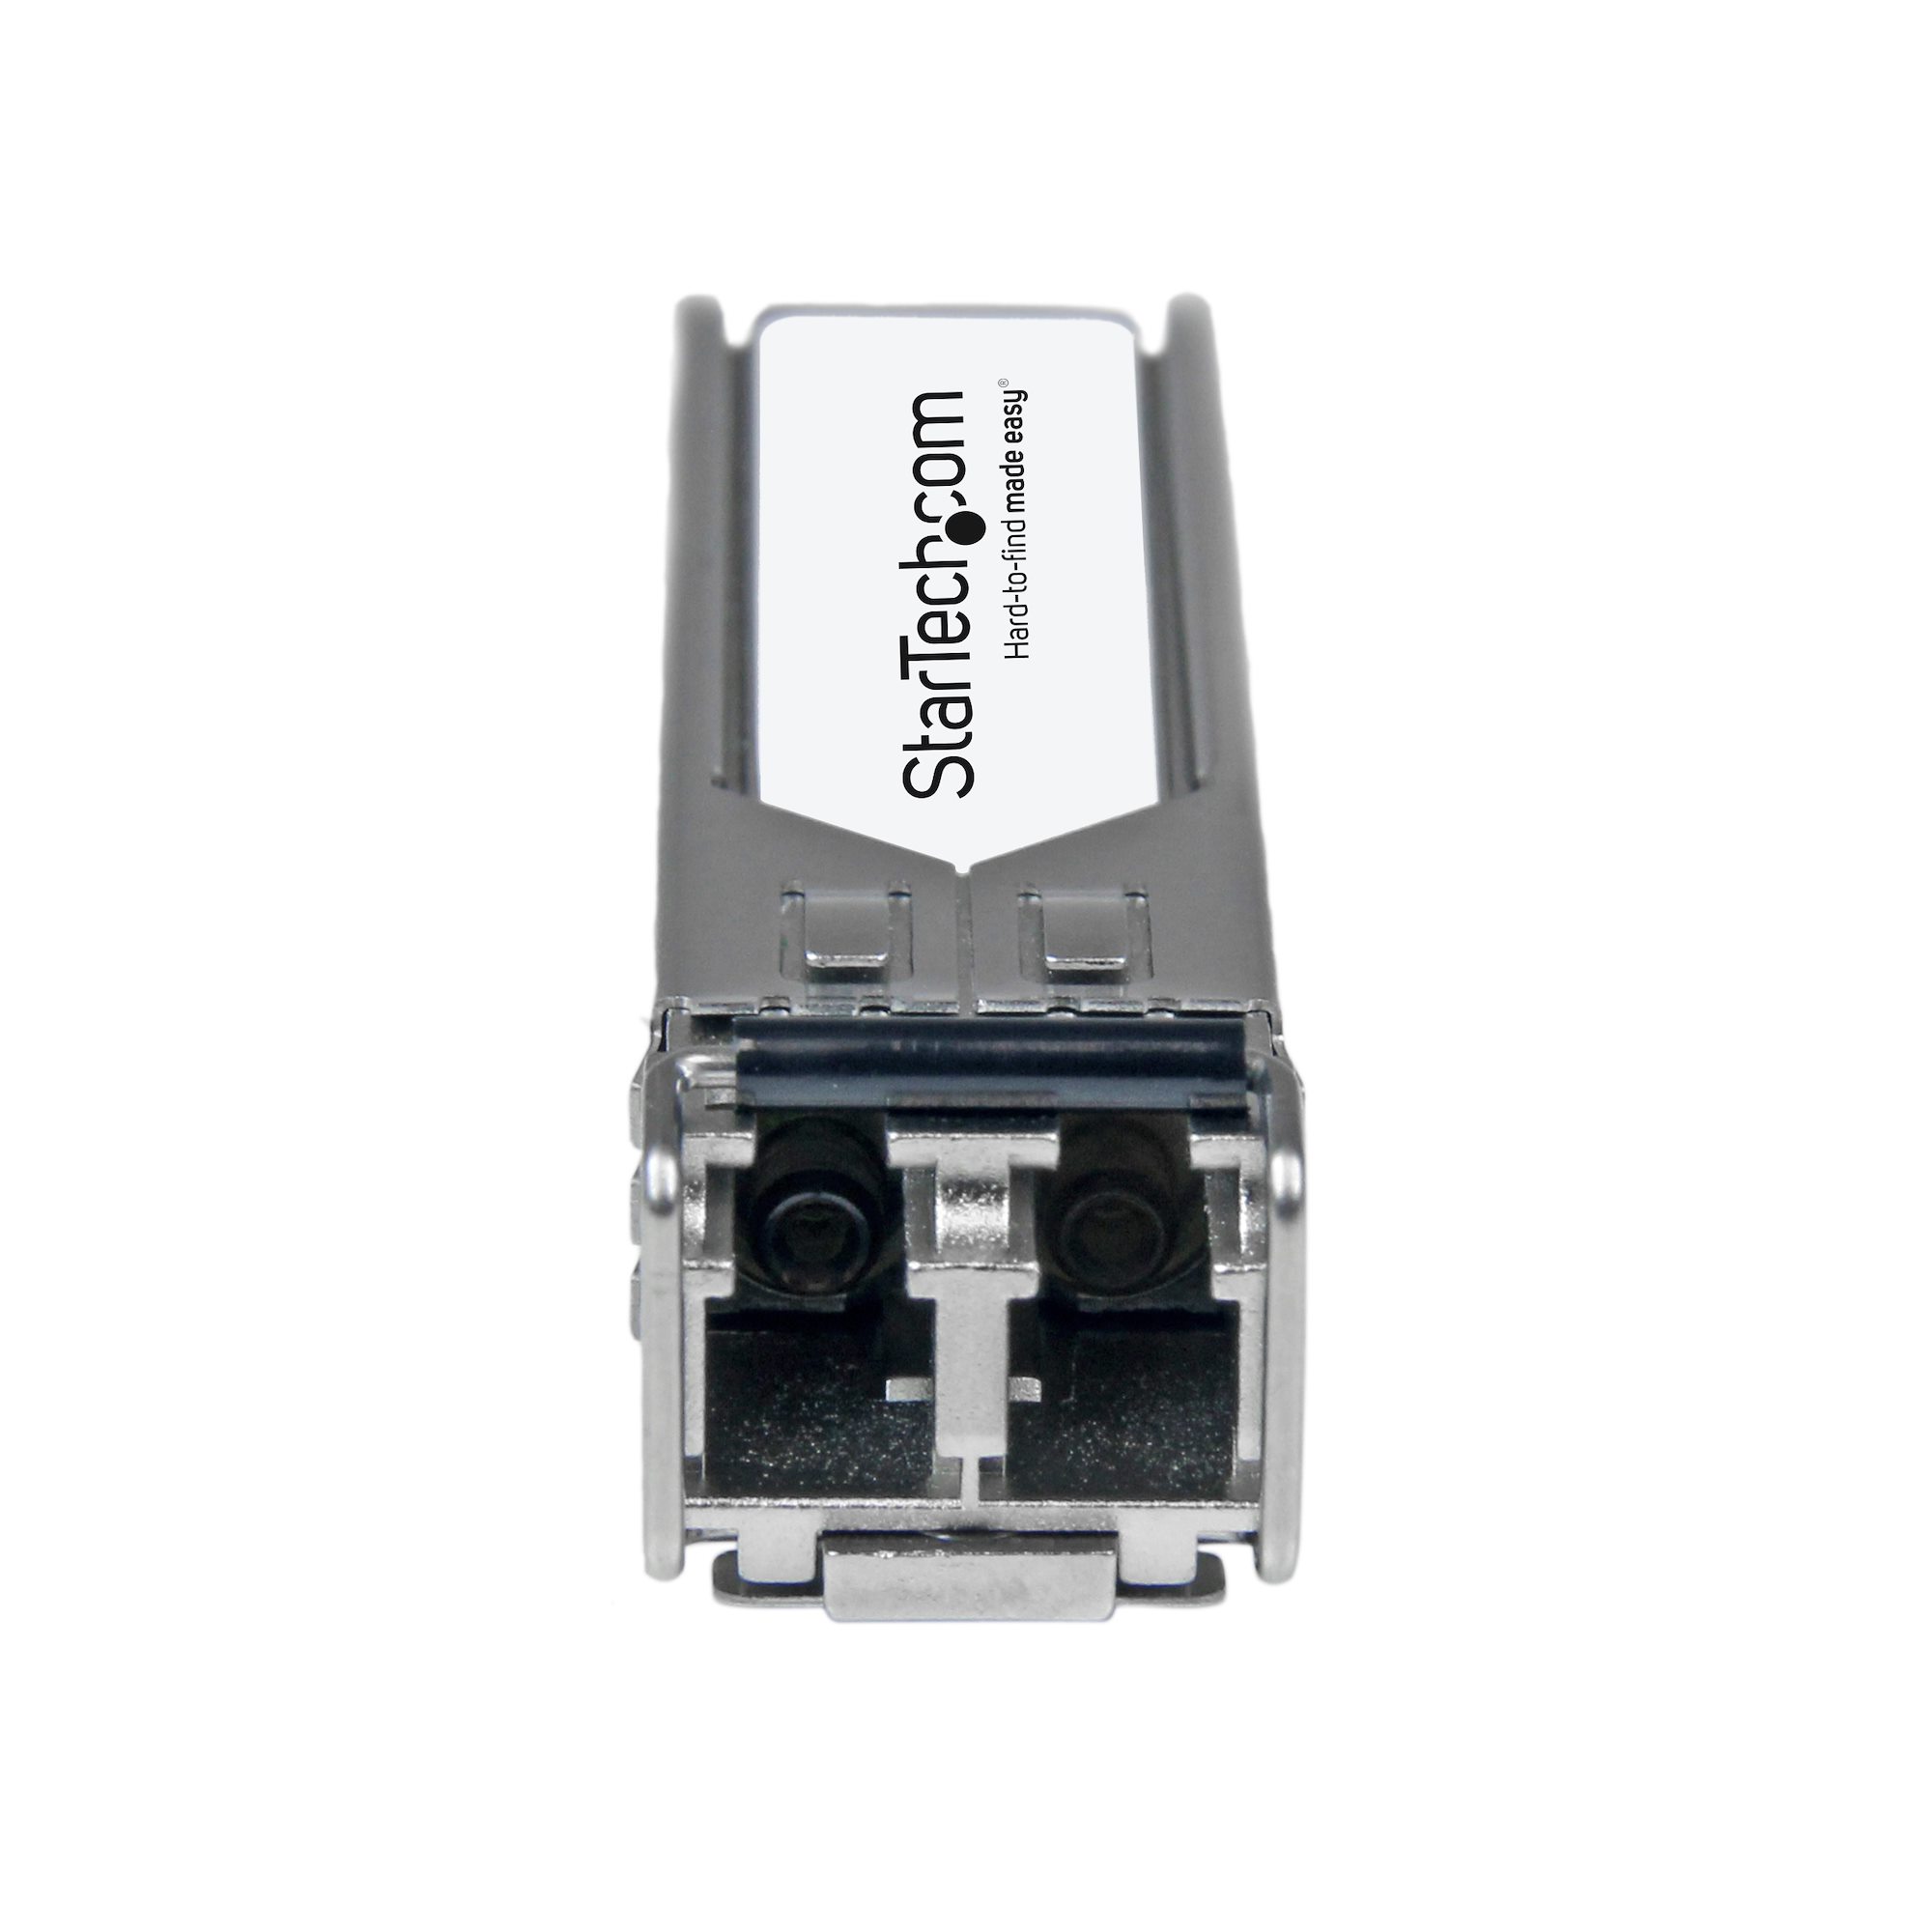 NEW Optcore 10GBASE-SR SFP 850nm 300m Transceiver For Brocade XBR-000180 